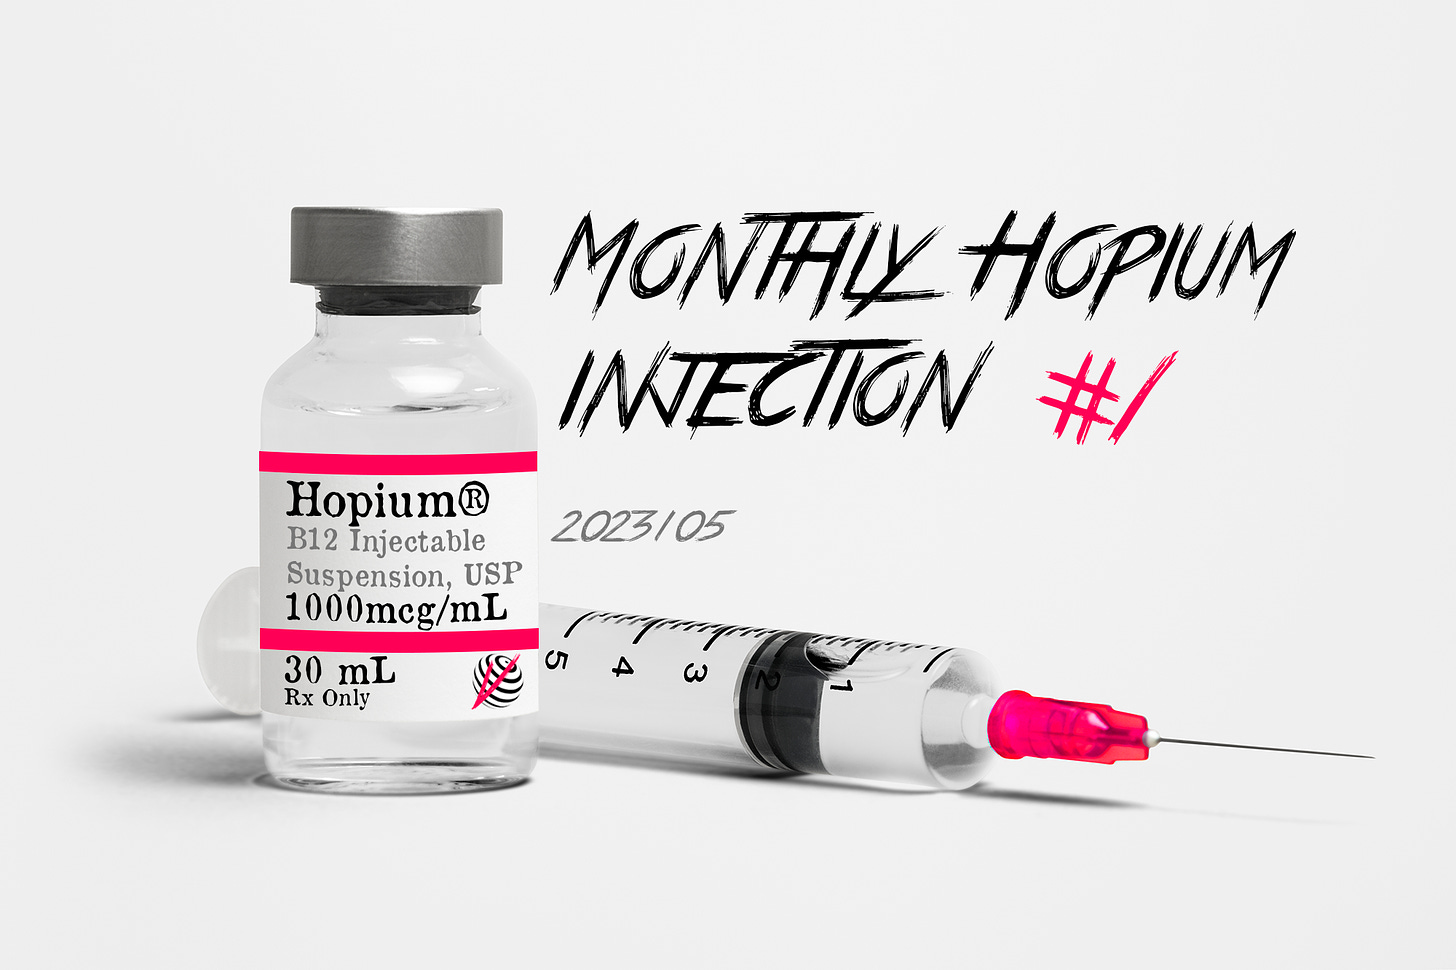 A custom vial of Hopium B12 Injectable Suspension, USP 1000mcg/mL 30mL Rx Only with the VEGAN WORLD NOW Logo and a syringe behind it. Above lies the text "Monthly Hopium Injection #1 2023/05"